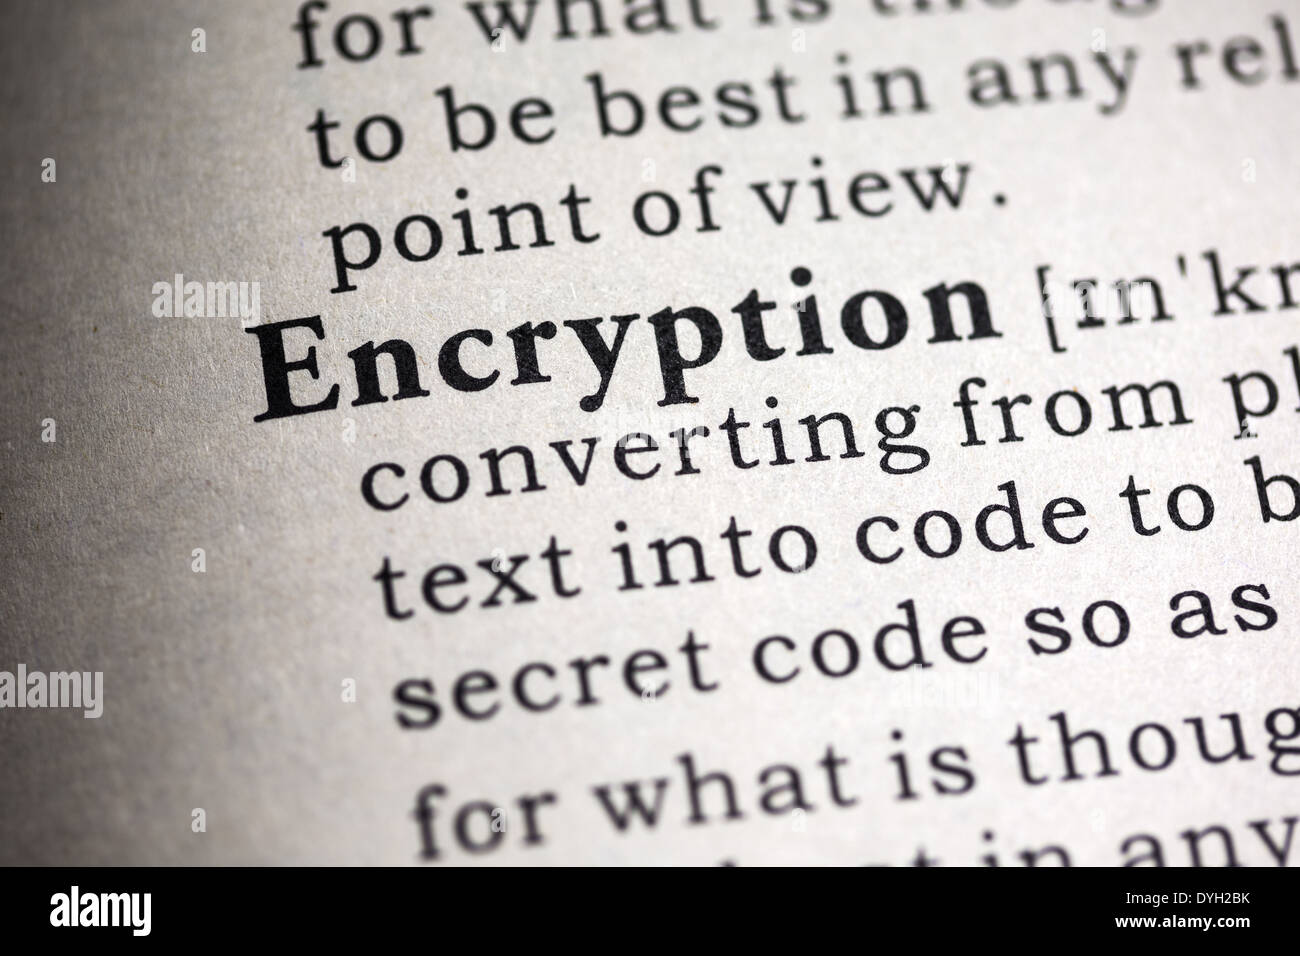 Fake Dictionary, Dictionary definition of the word encryption. Stock Photo